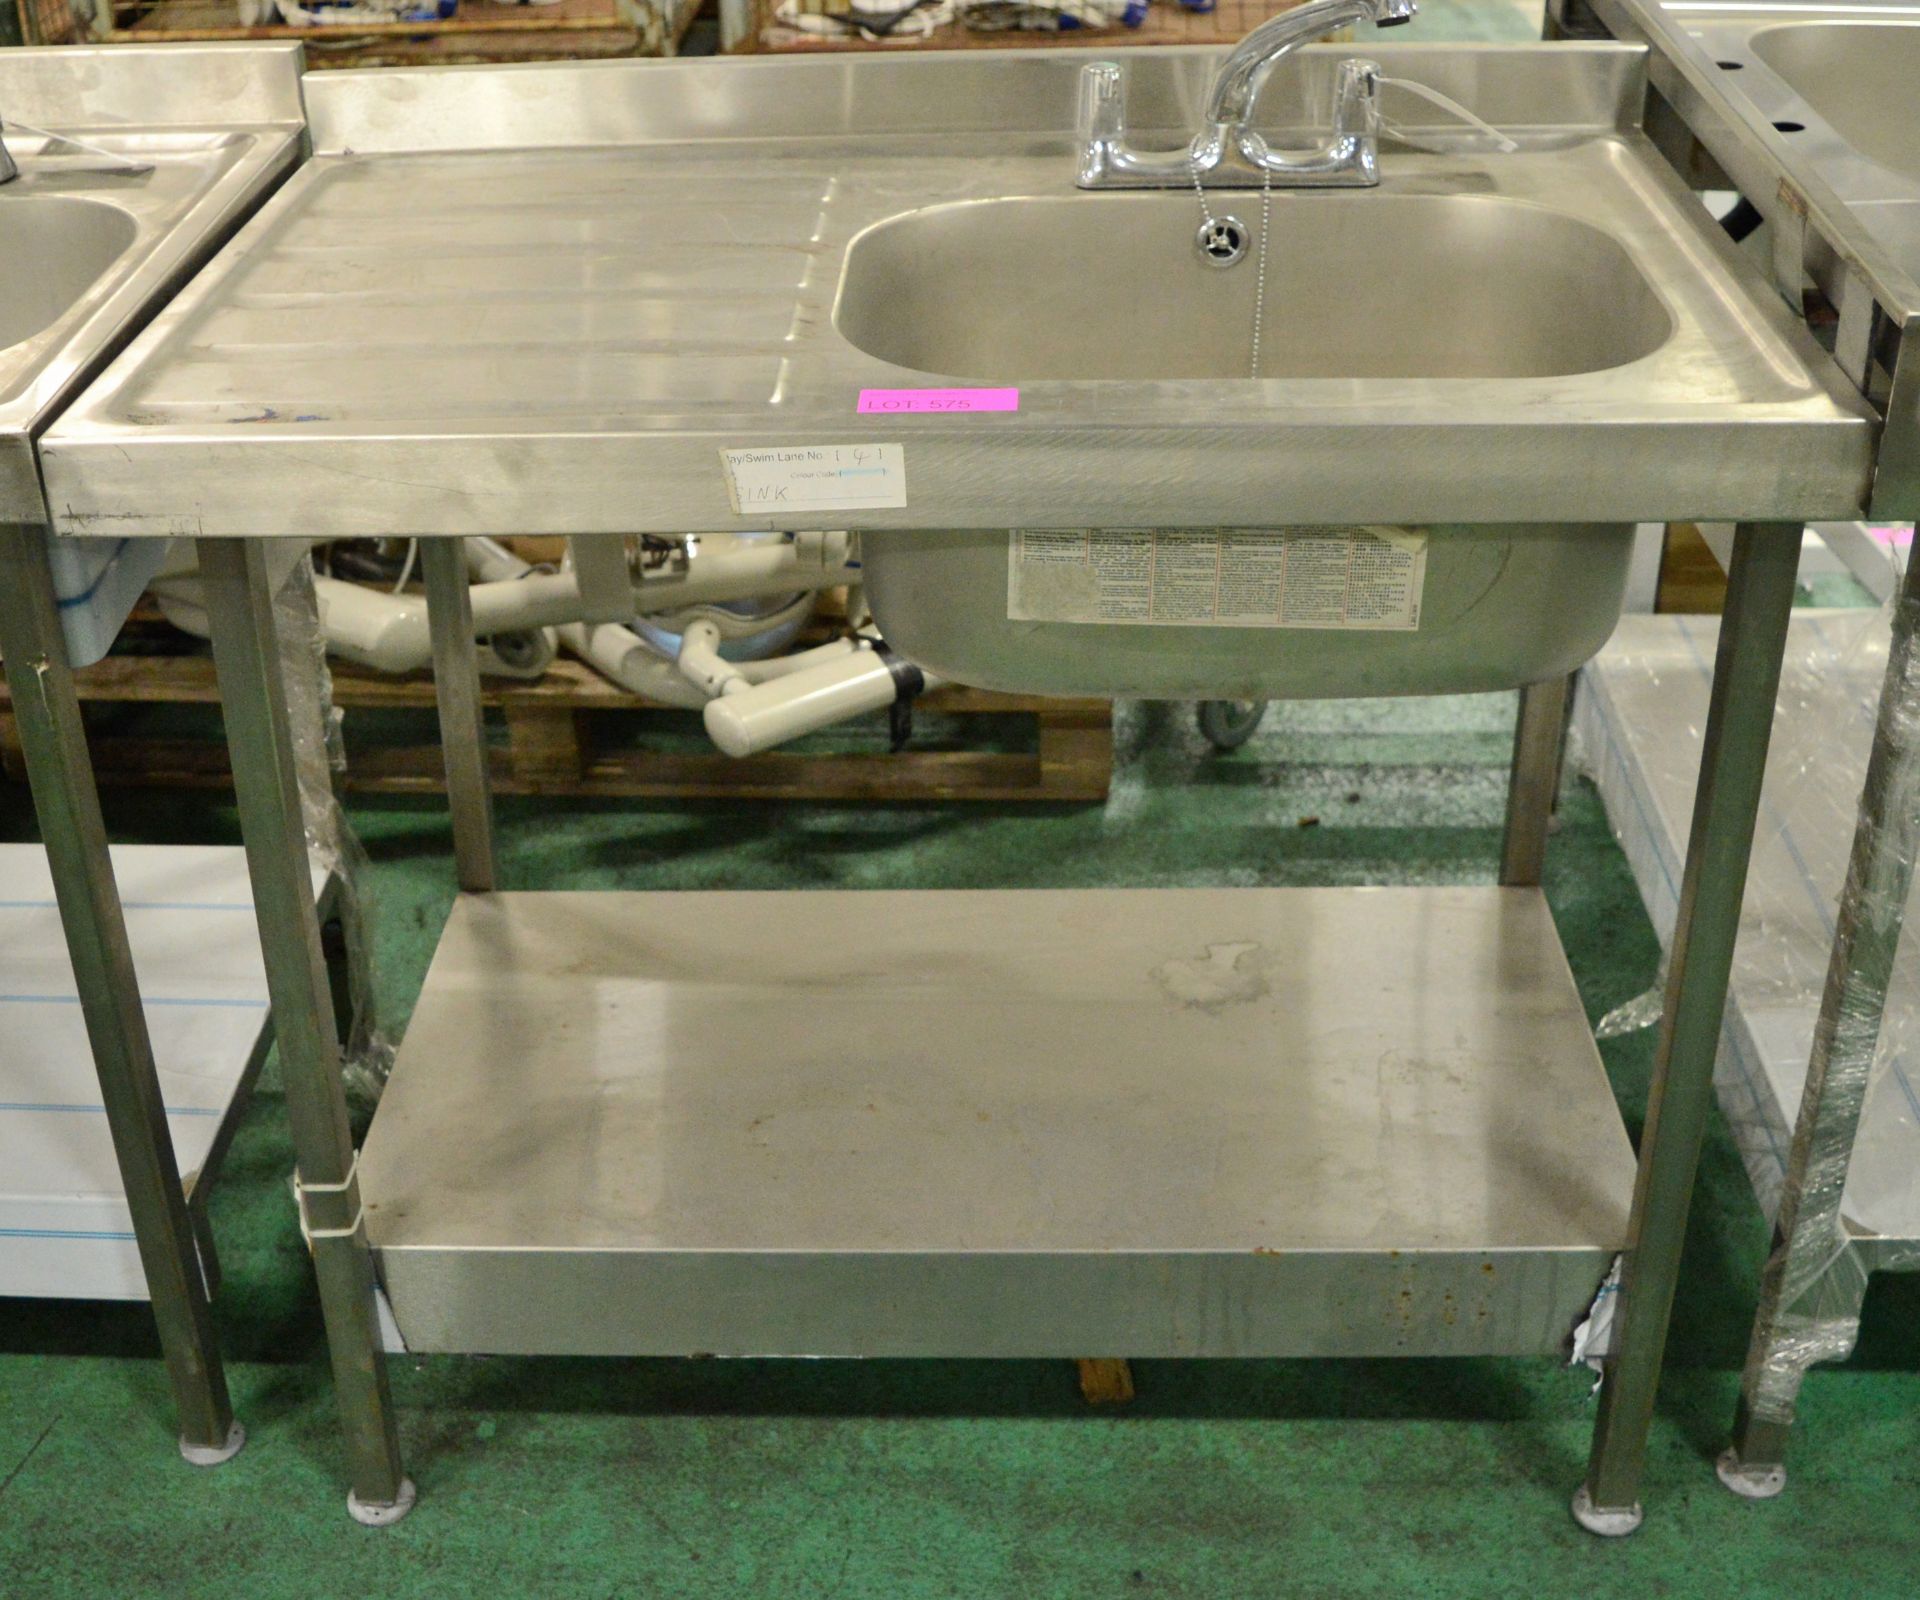 Stainless Steel Single Sink Unit with Taps L1000 x D600 x H910mm.